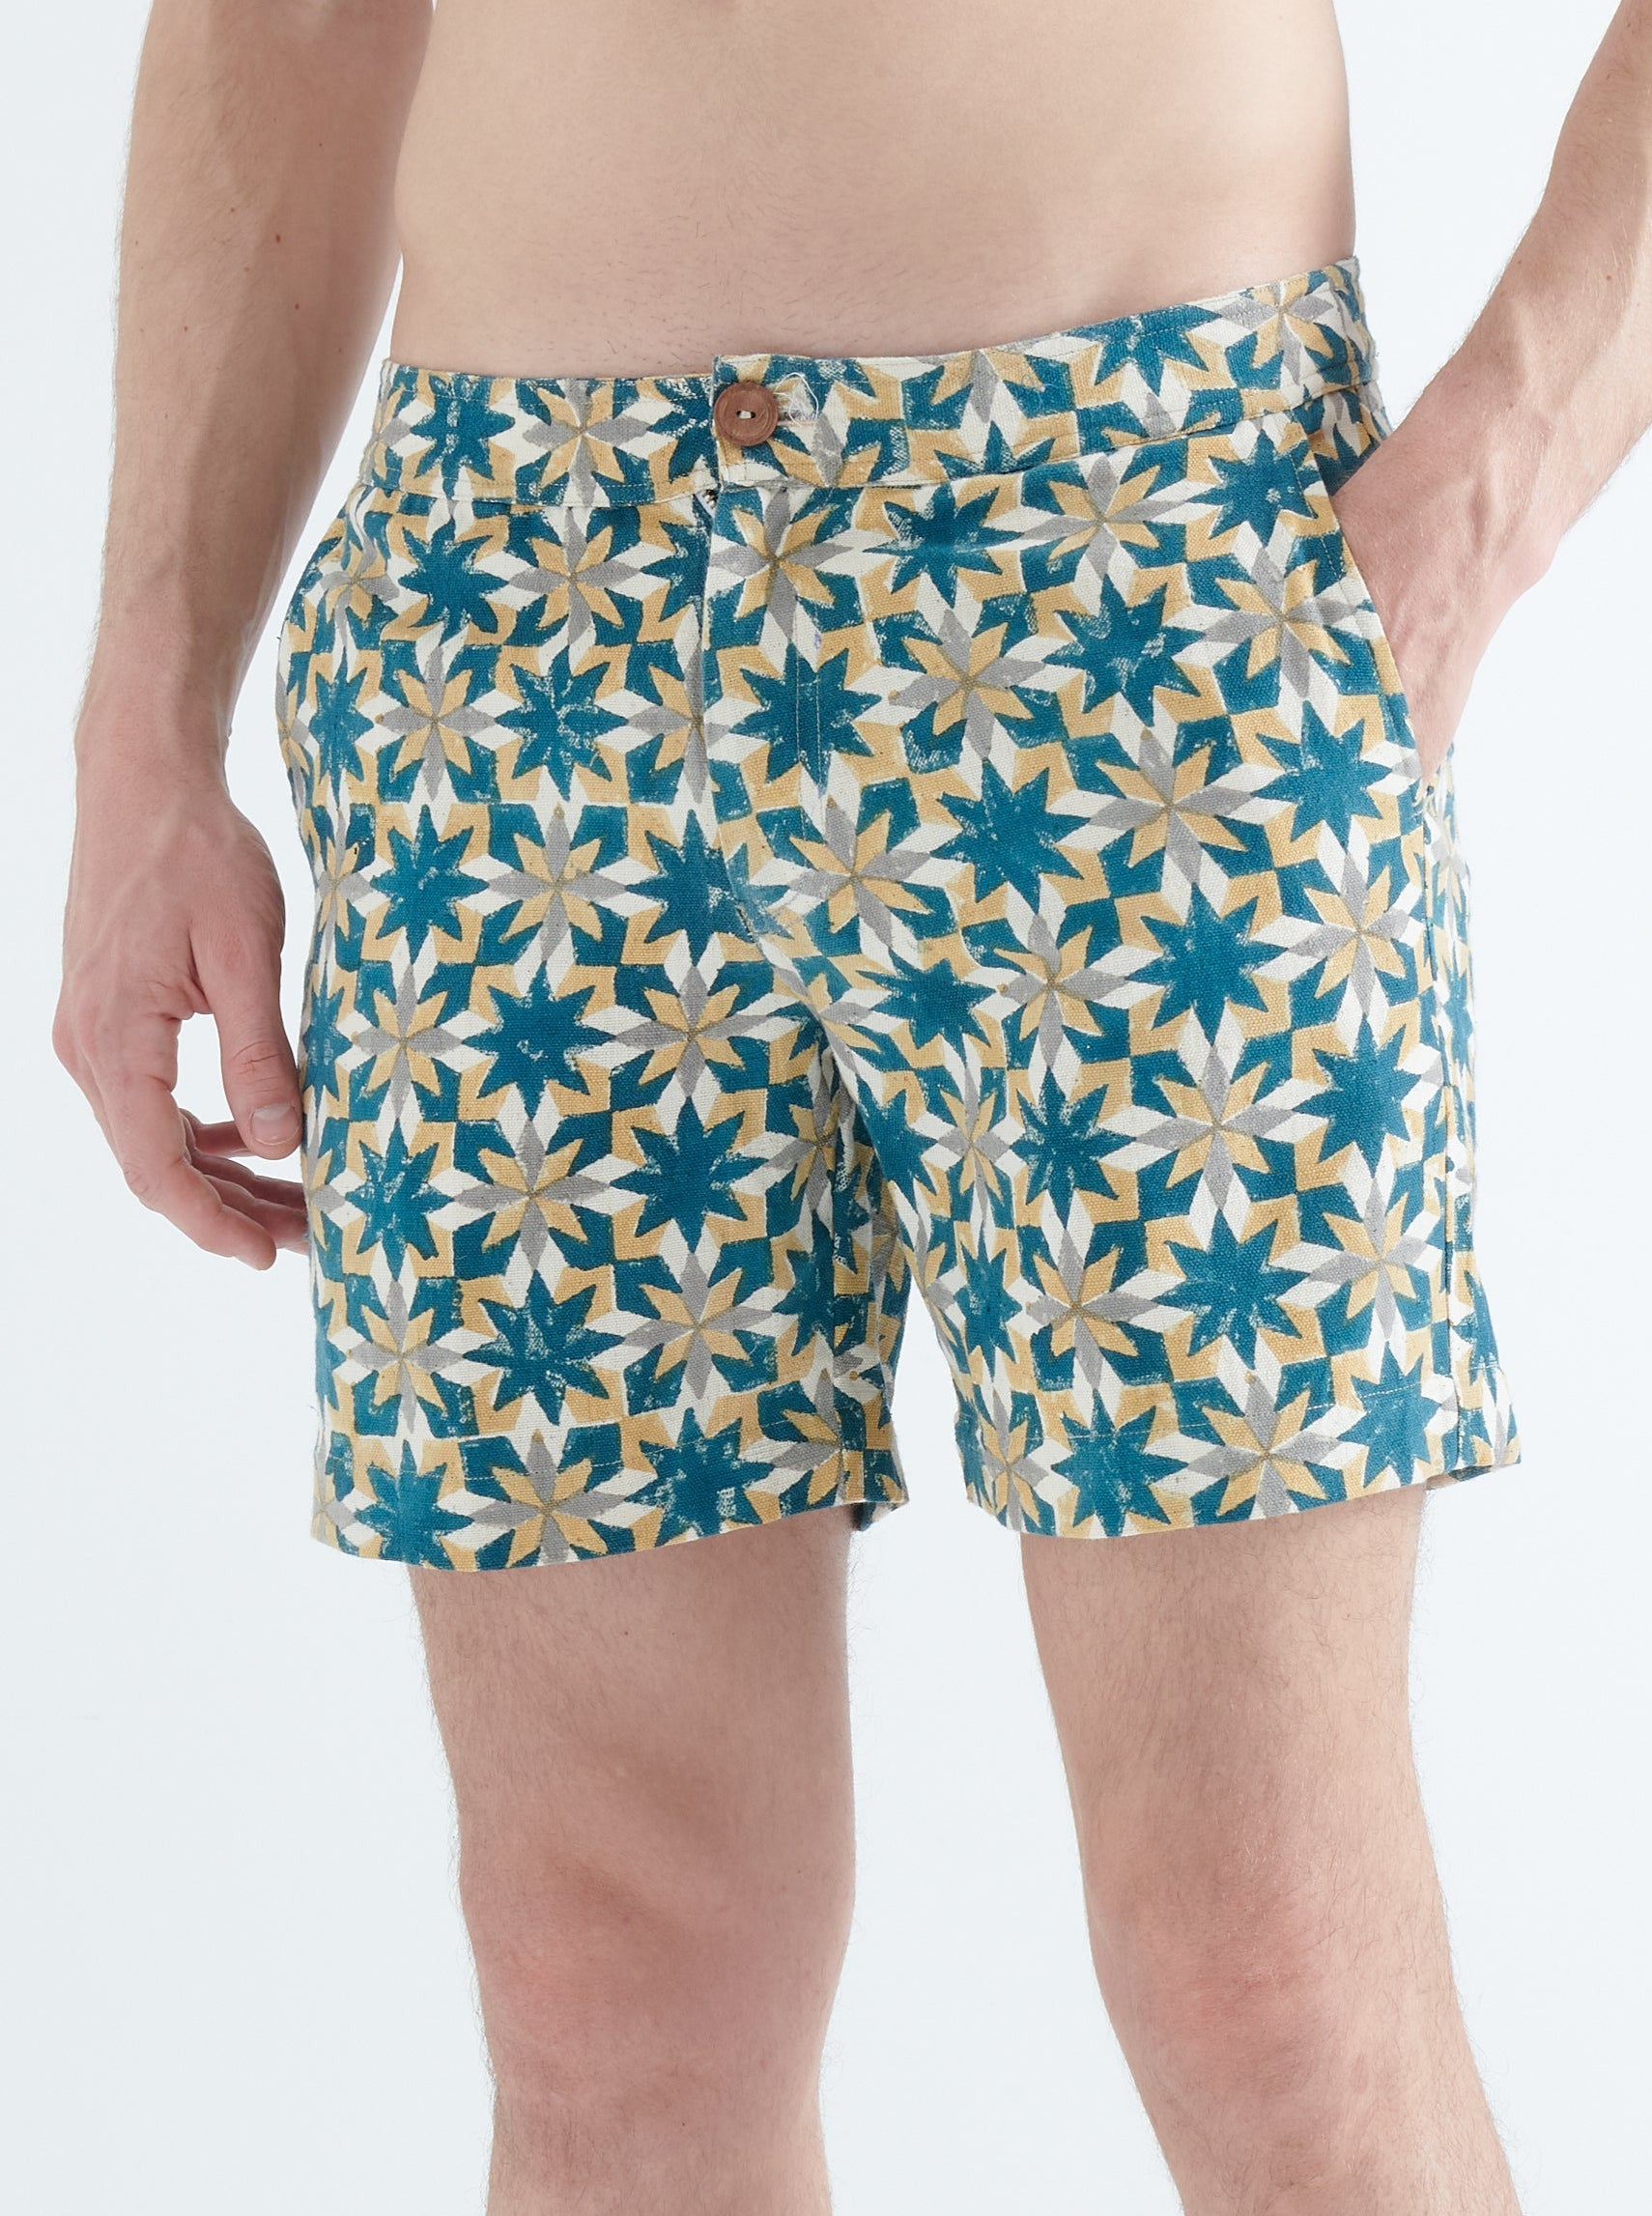 Pines Shorts in Cotton Waffle in Yellow and Green Block Print